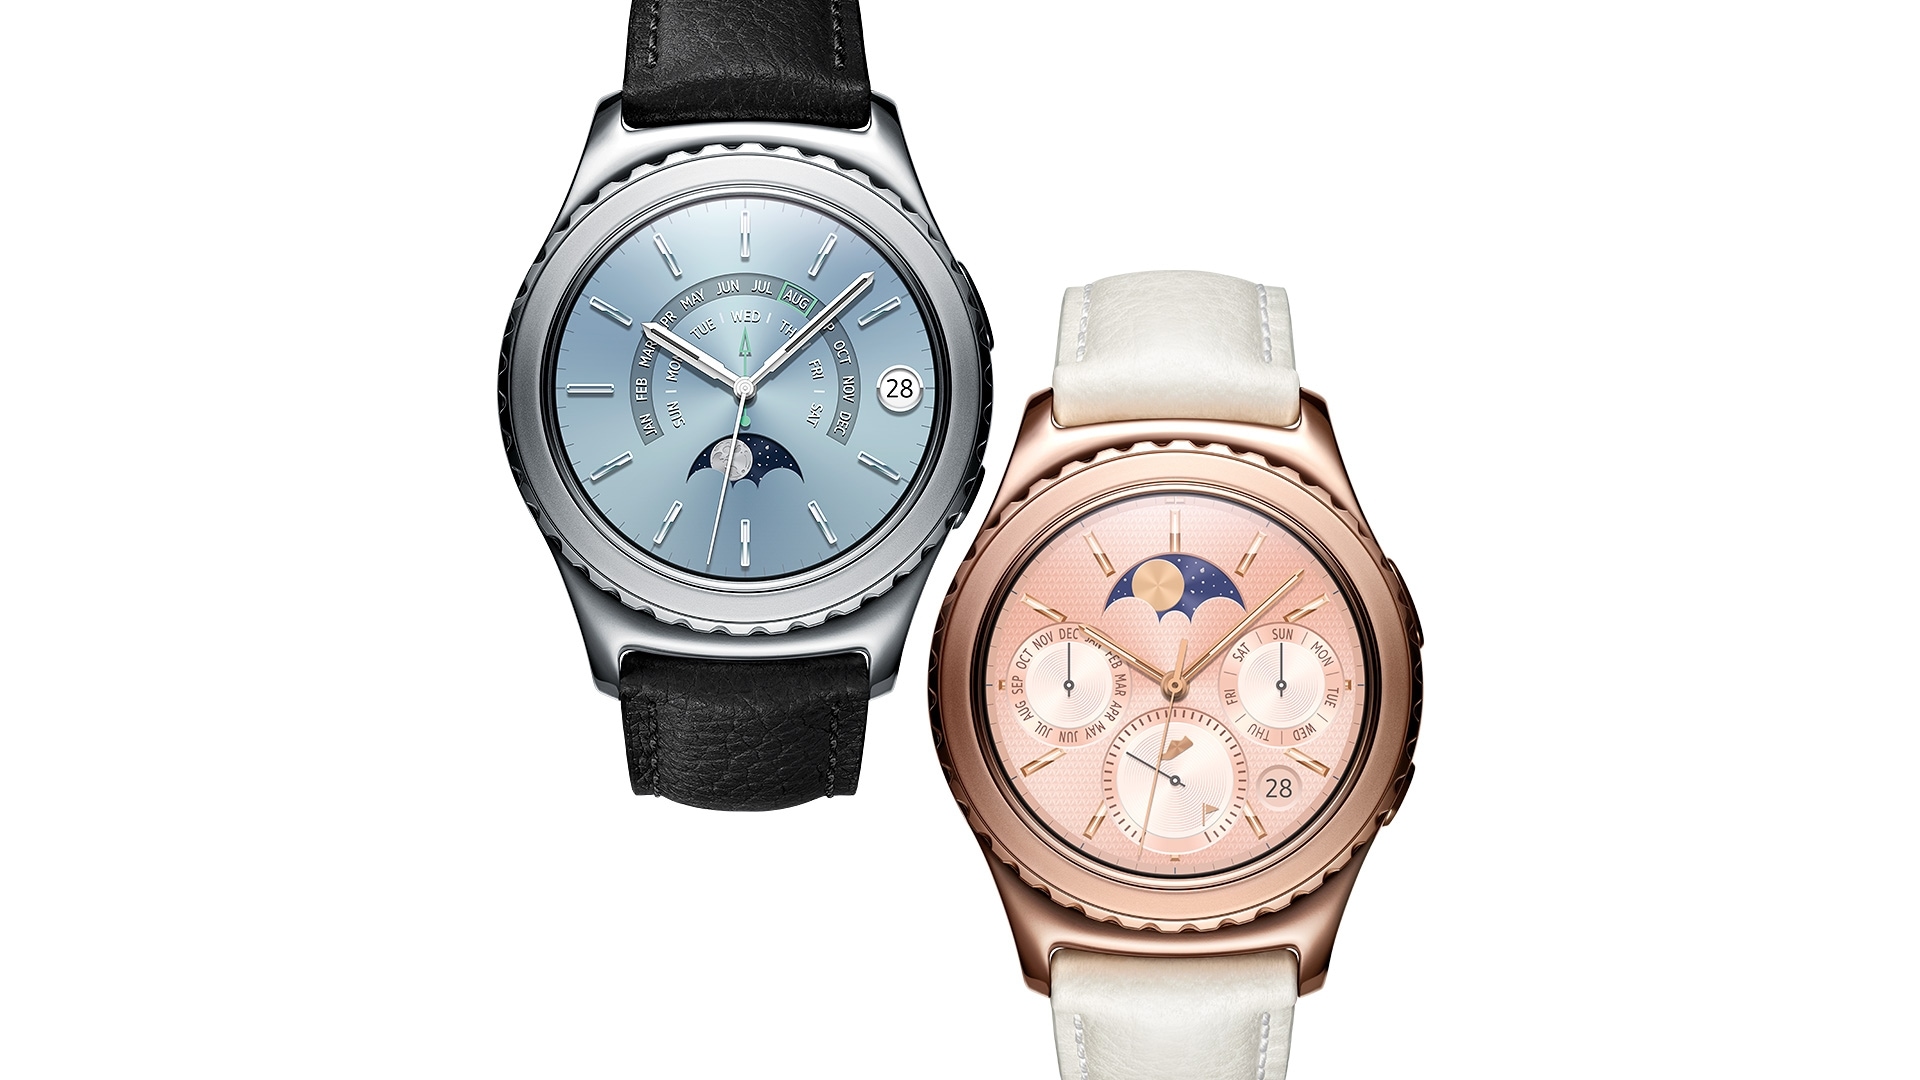 Platinum Gear S2 classic and rose gold gear s2 classic side by side